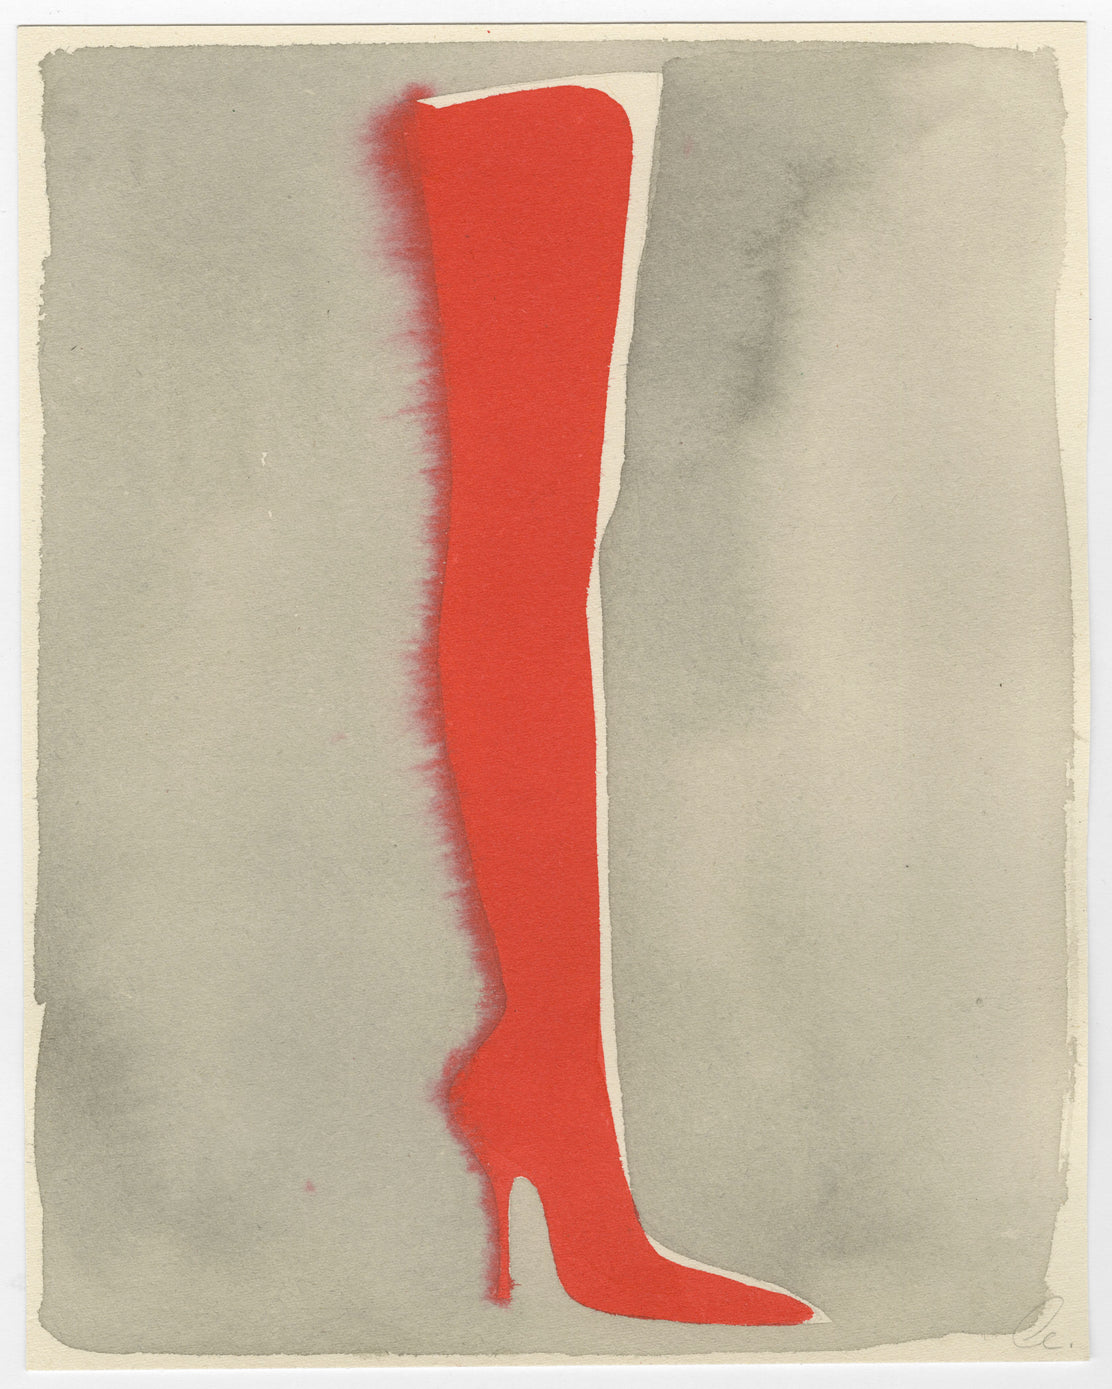 Cecilia Carlstedt - Red, Black, Grey #4